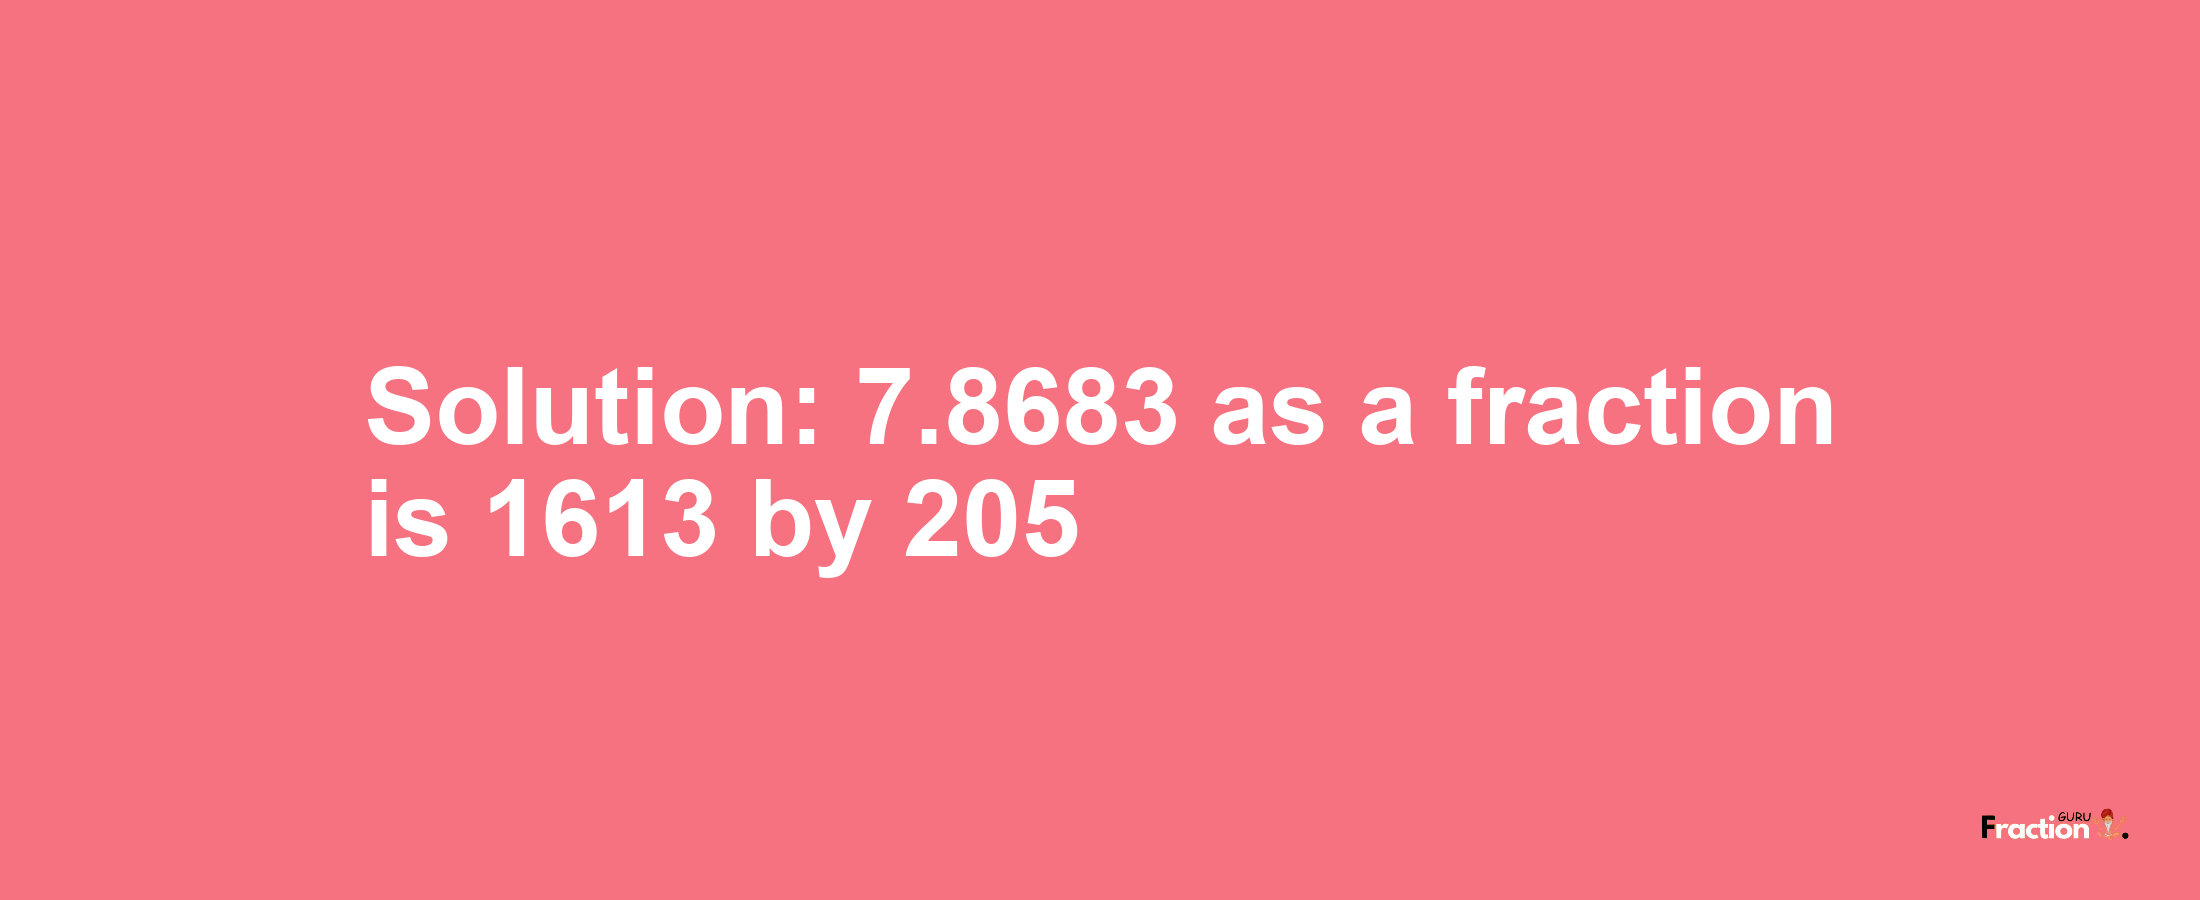 Solution:7.8683 as a fraction is 1613/205